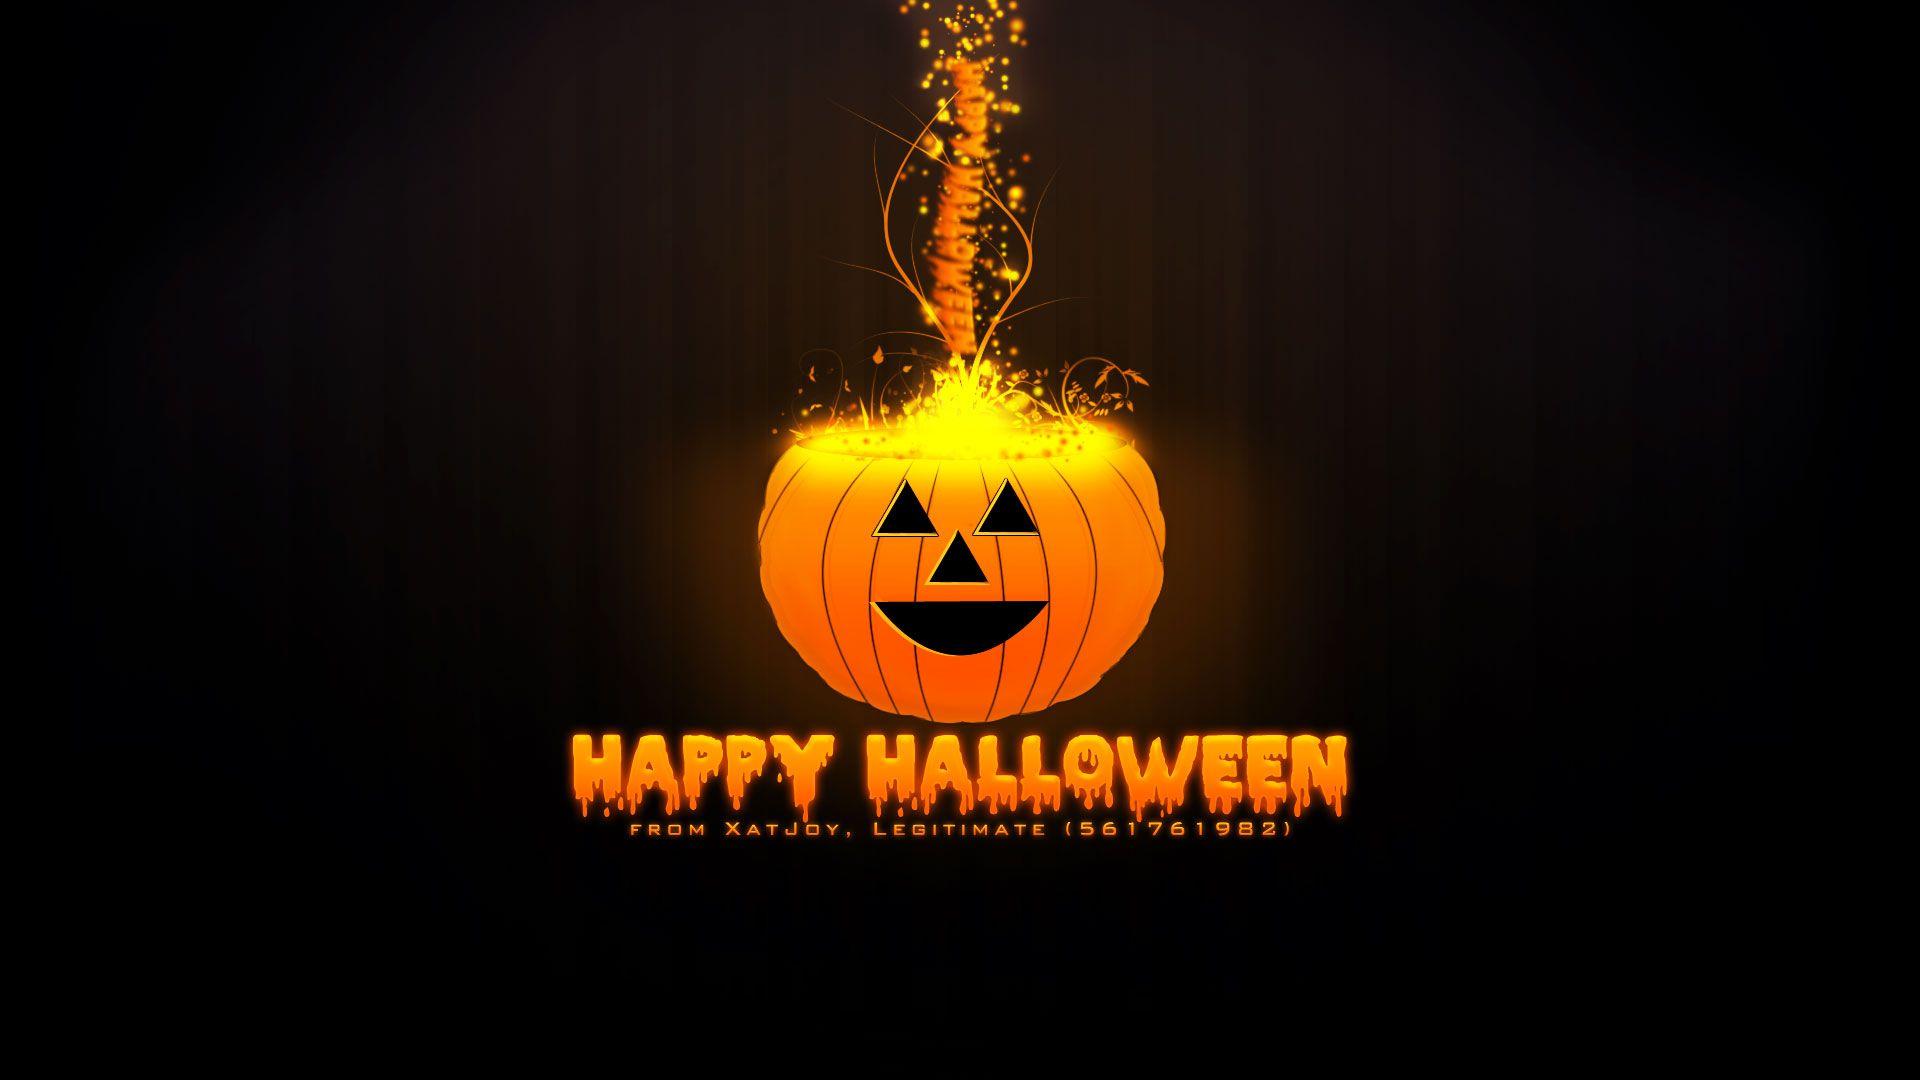 Details more than 94 funny halloween wallpapers best - in.coedo.com.vn